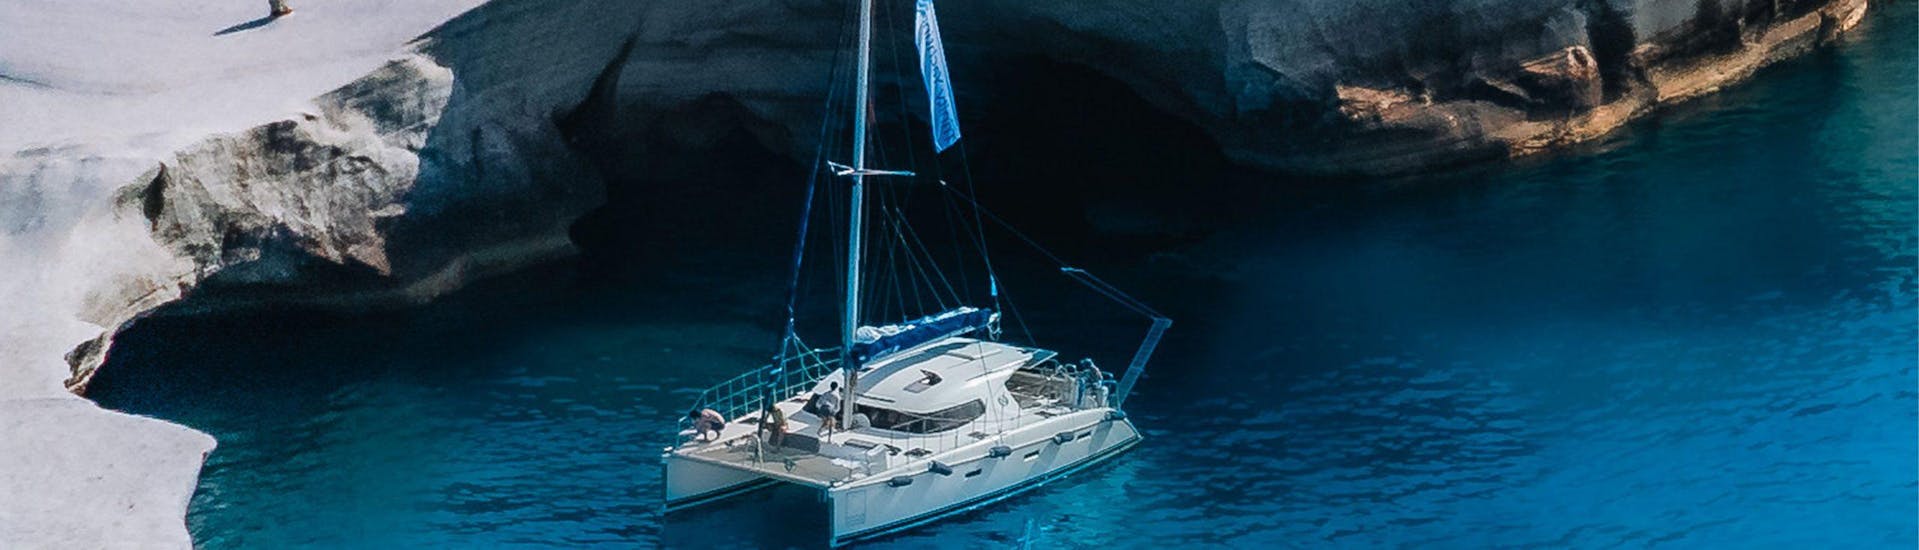 The Catamaran of Trinity Yachting Milos during a boat tip.